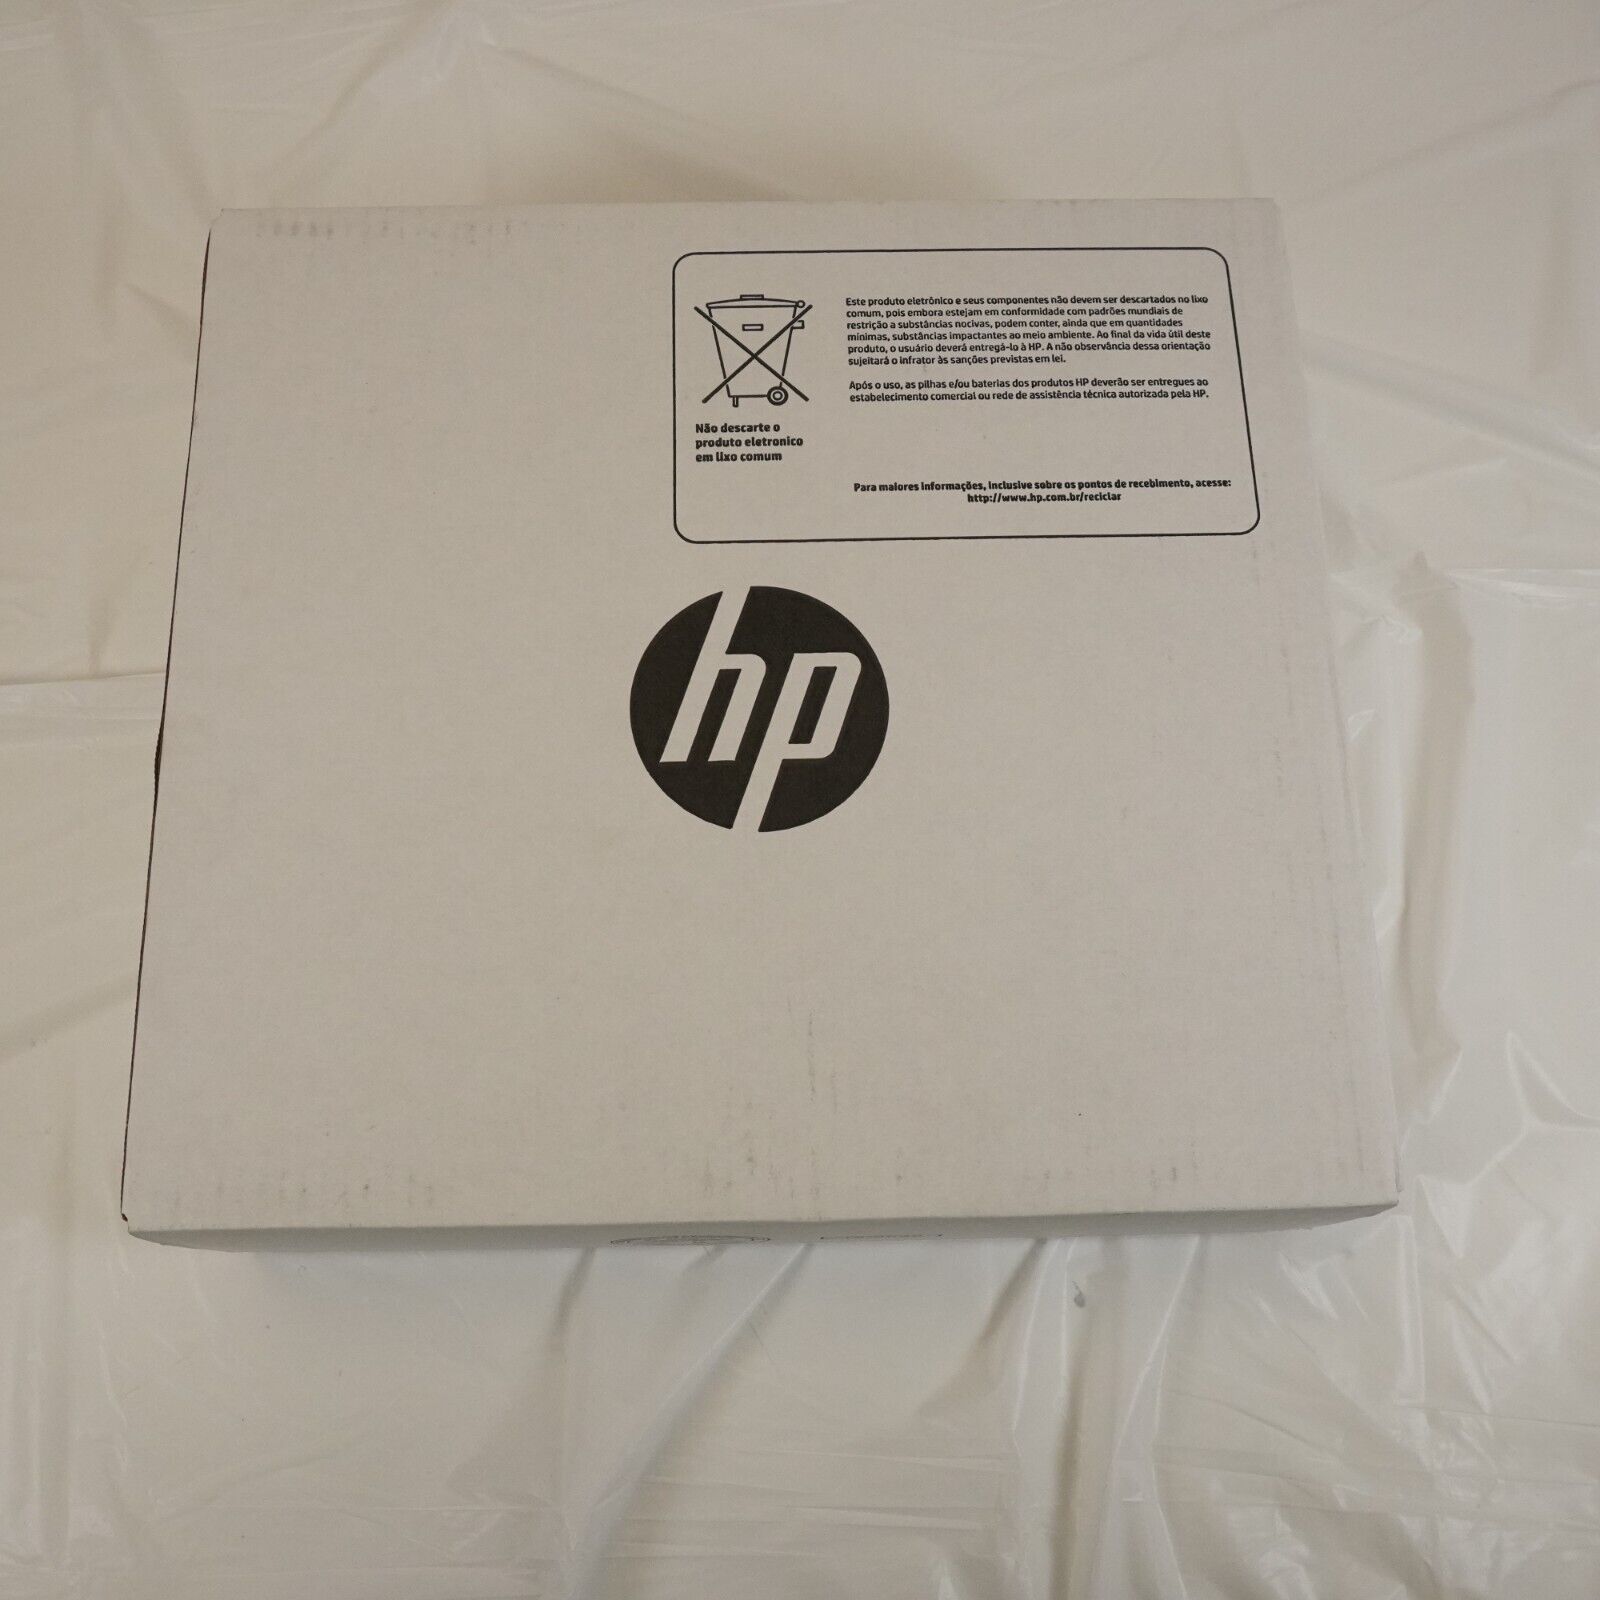 HP LaserJet Toner Collection Unit ~100,000 pages P1B94A - NEW IN BOX - SEALED